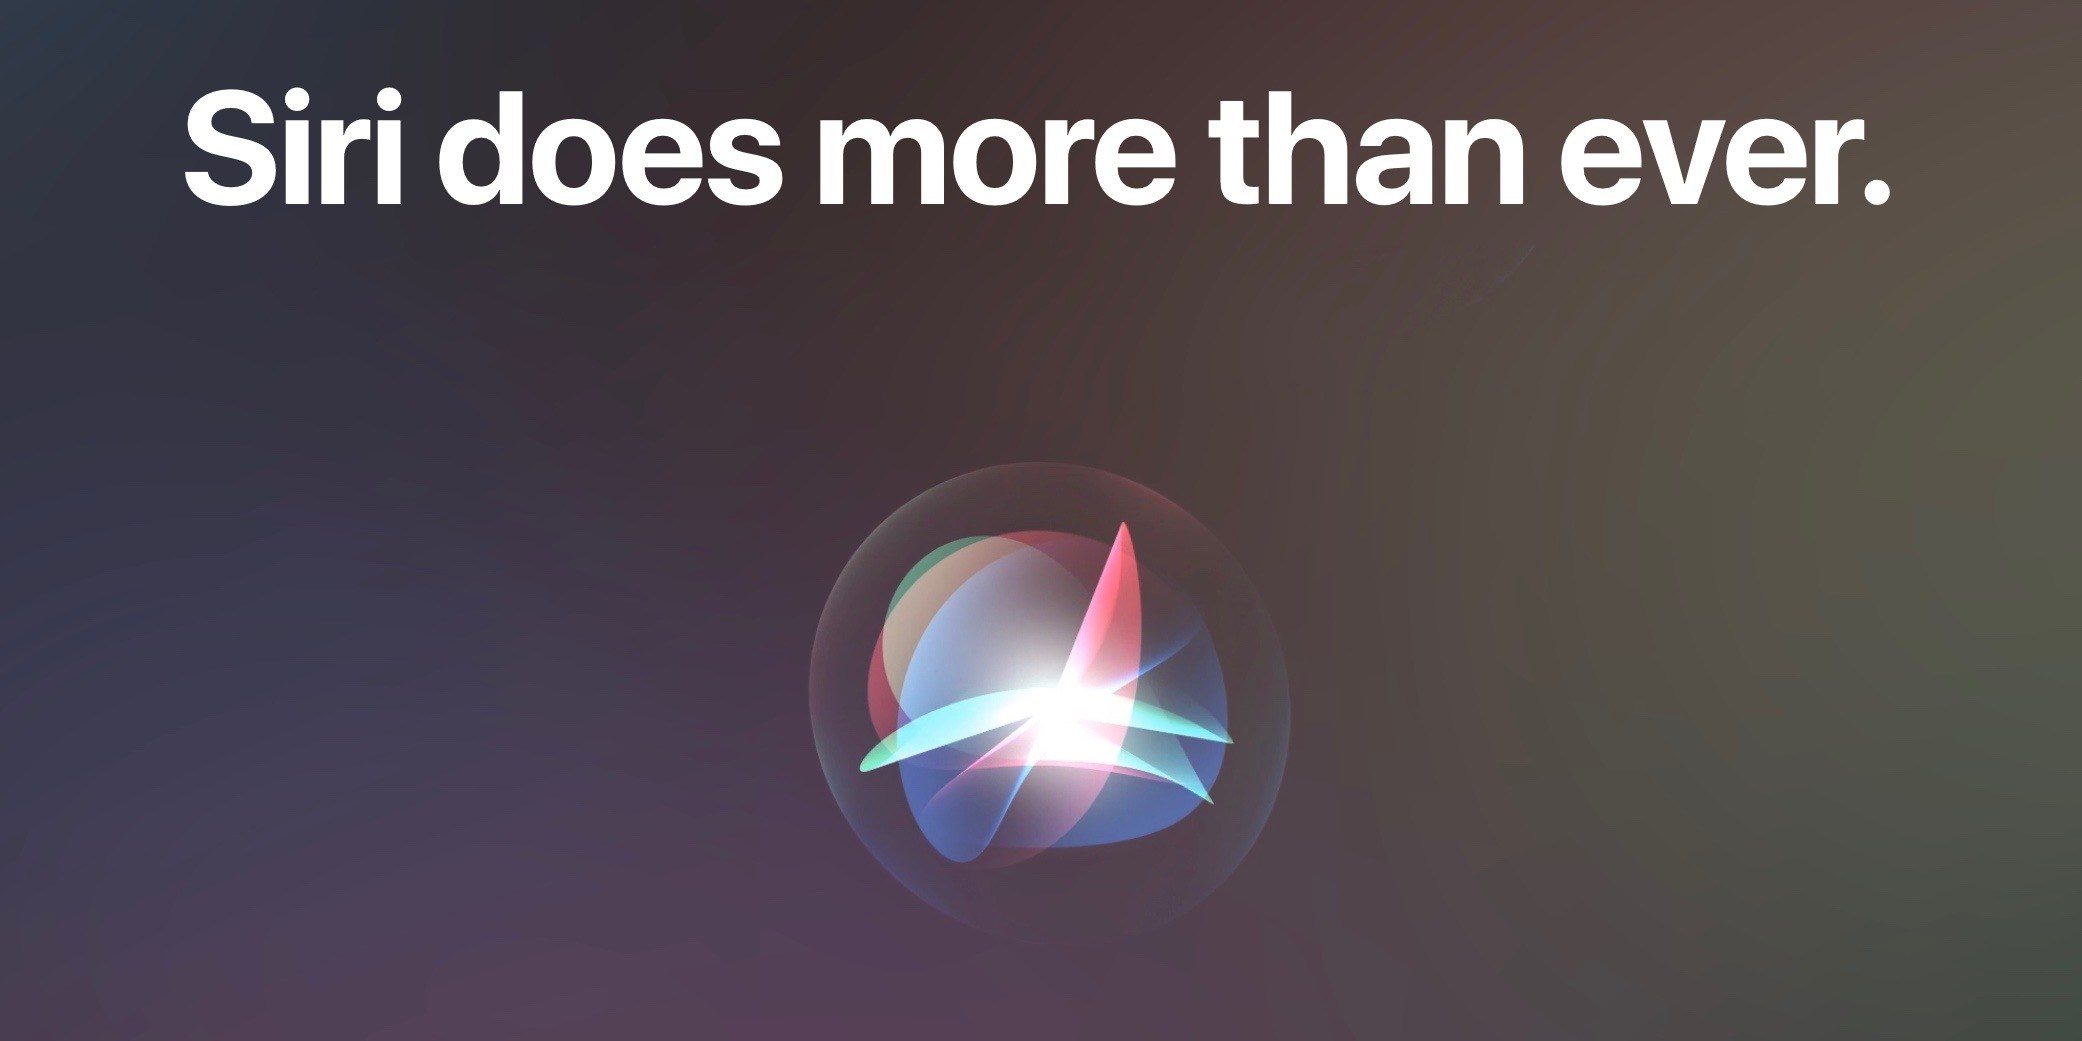 Siri's Human Interface Guidelines updated